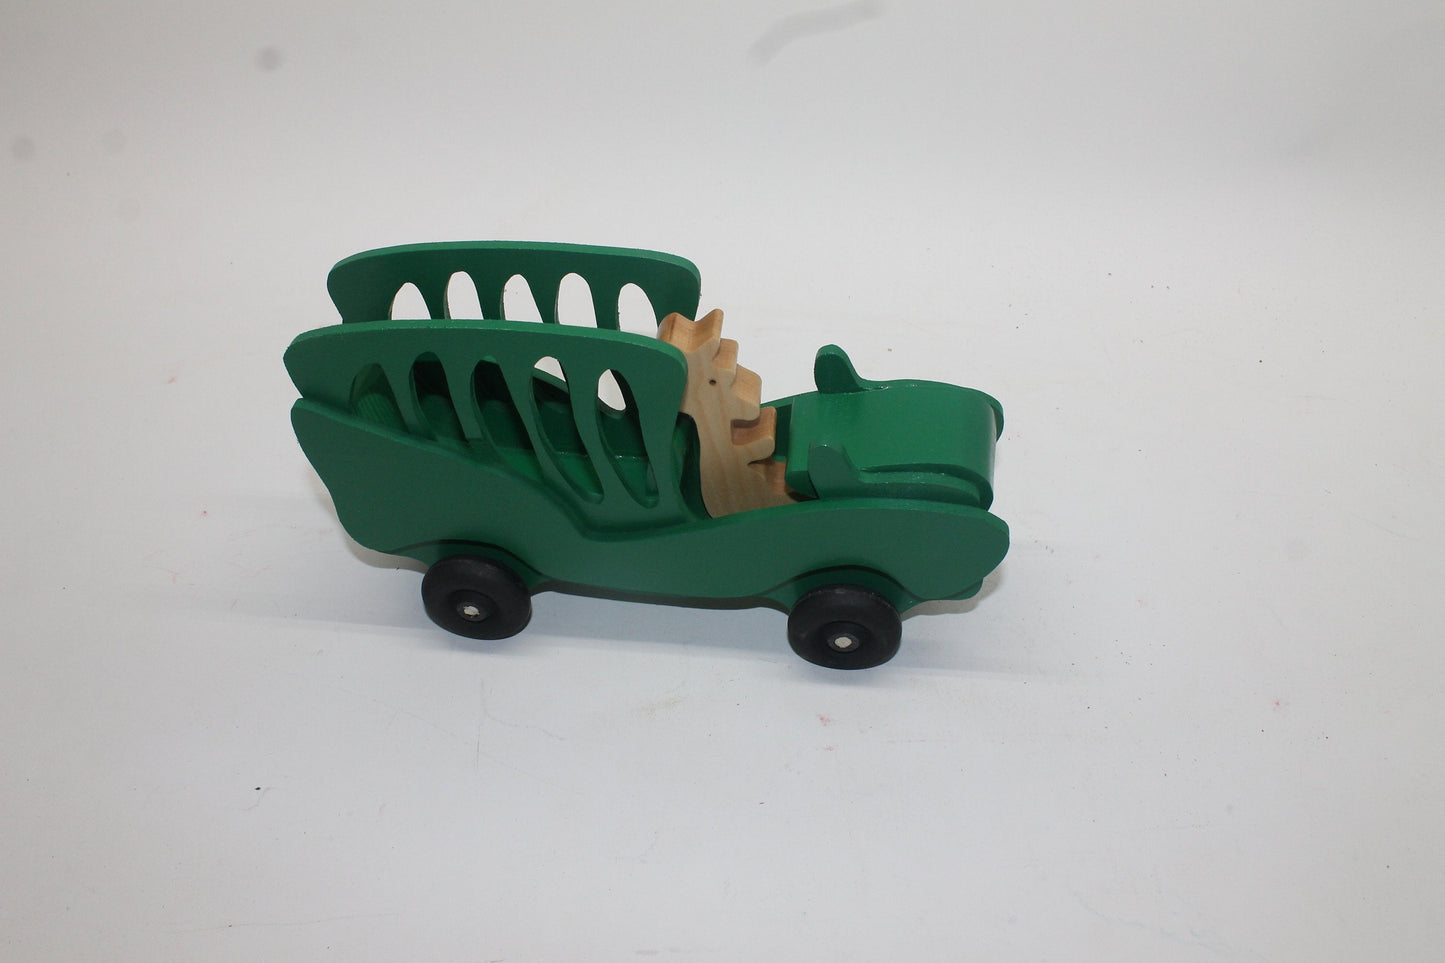 Serengeti safari play set. It contains a vehicle, people, animals, cage, and even a tree. Solid wood construction